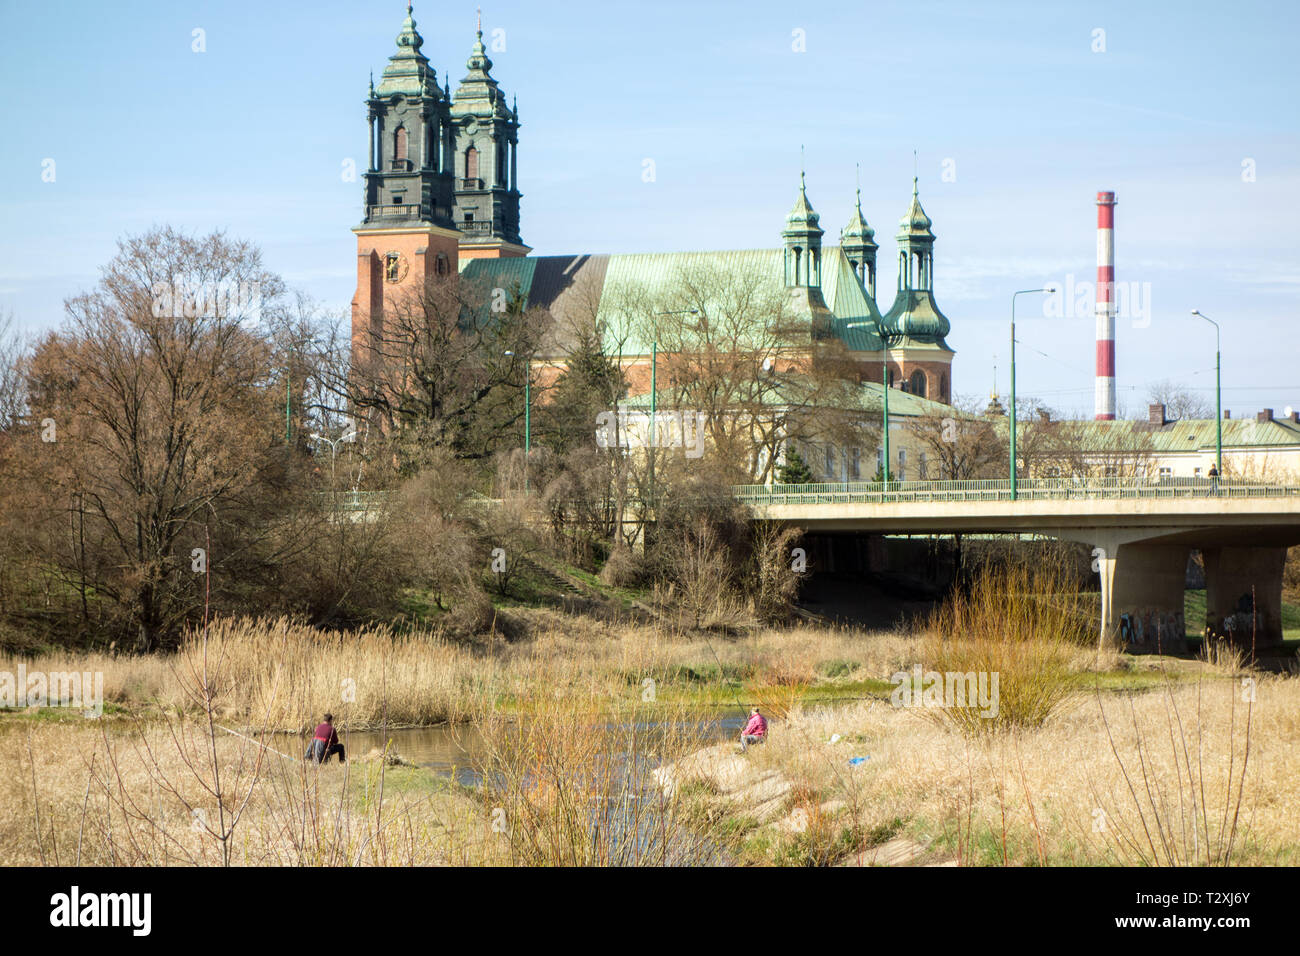 Two men fishing in a river in front of the cathedral of St Peter and St Paul on Ostrow Tumski island in the Polish city of Poznan Poland Stock Photo